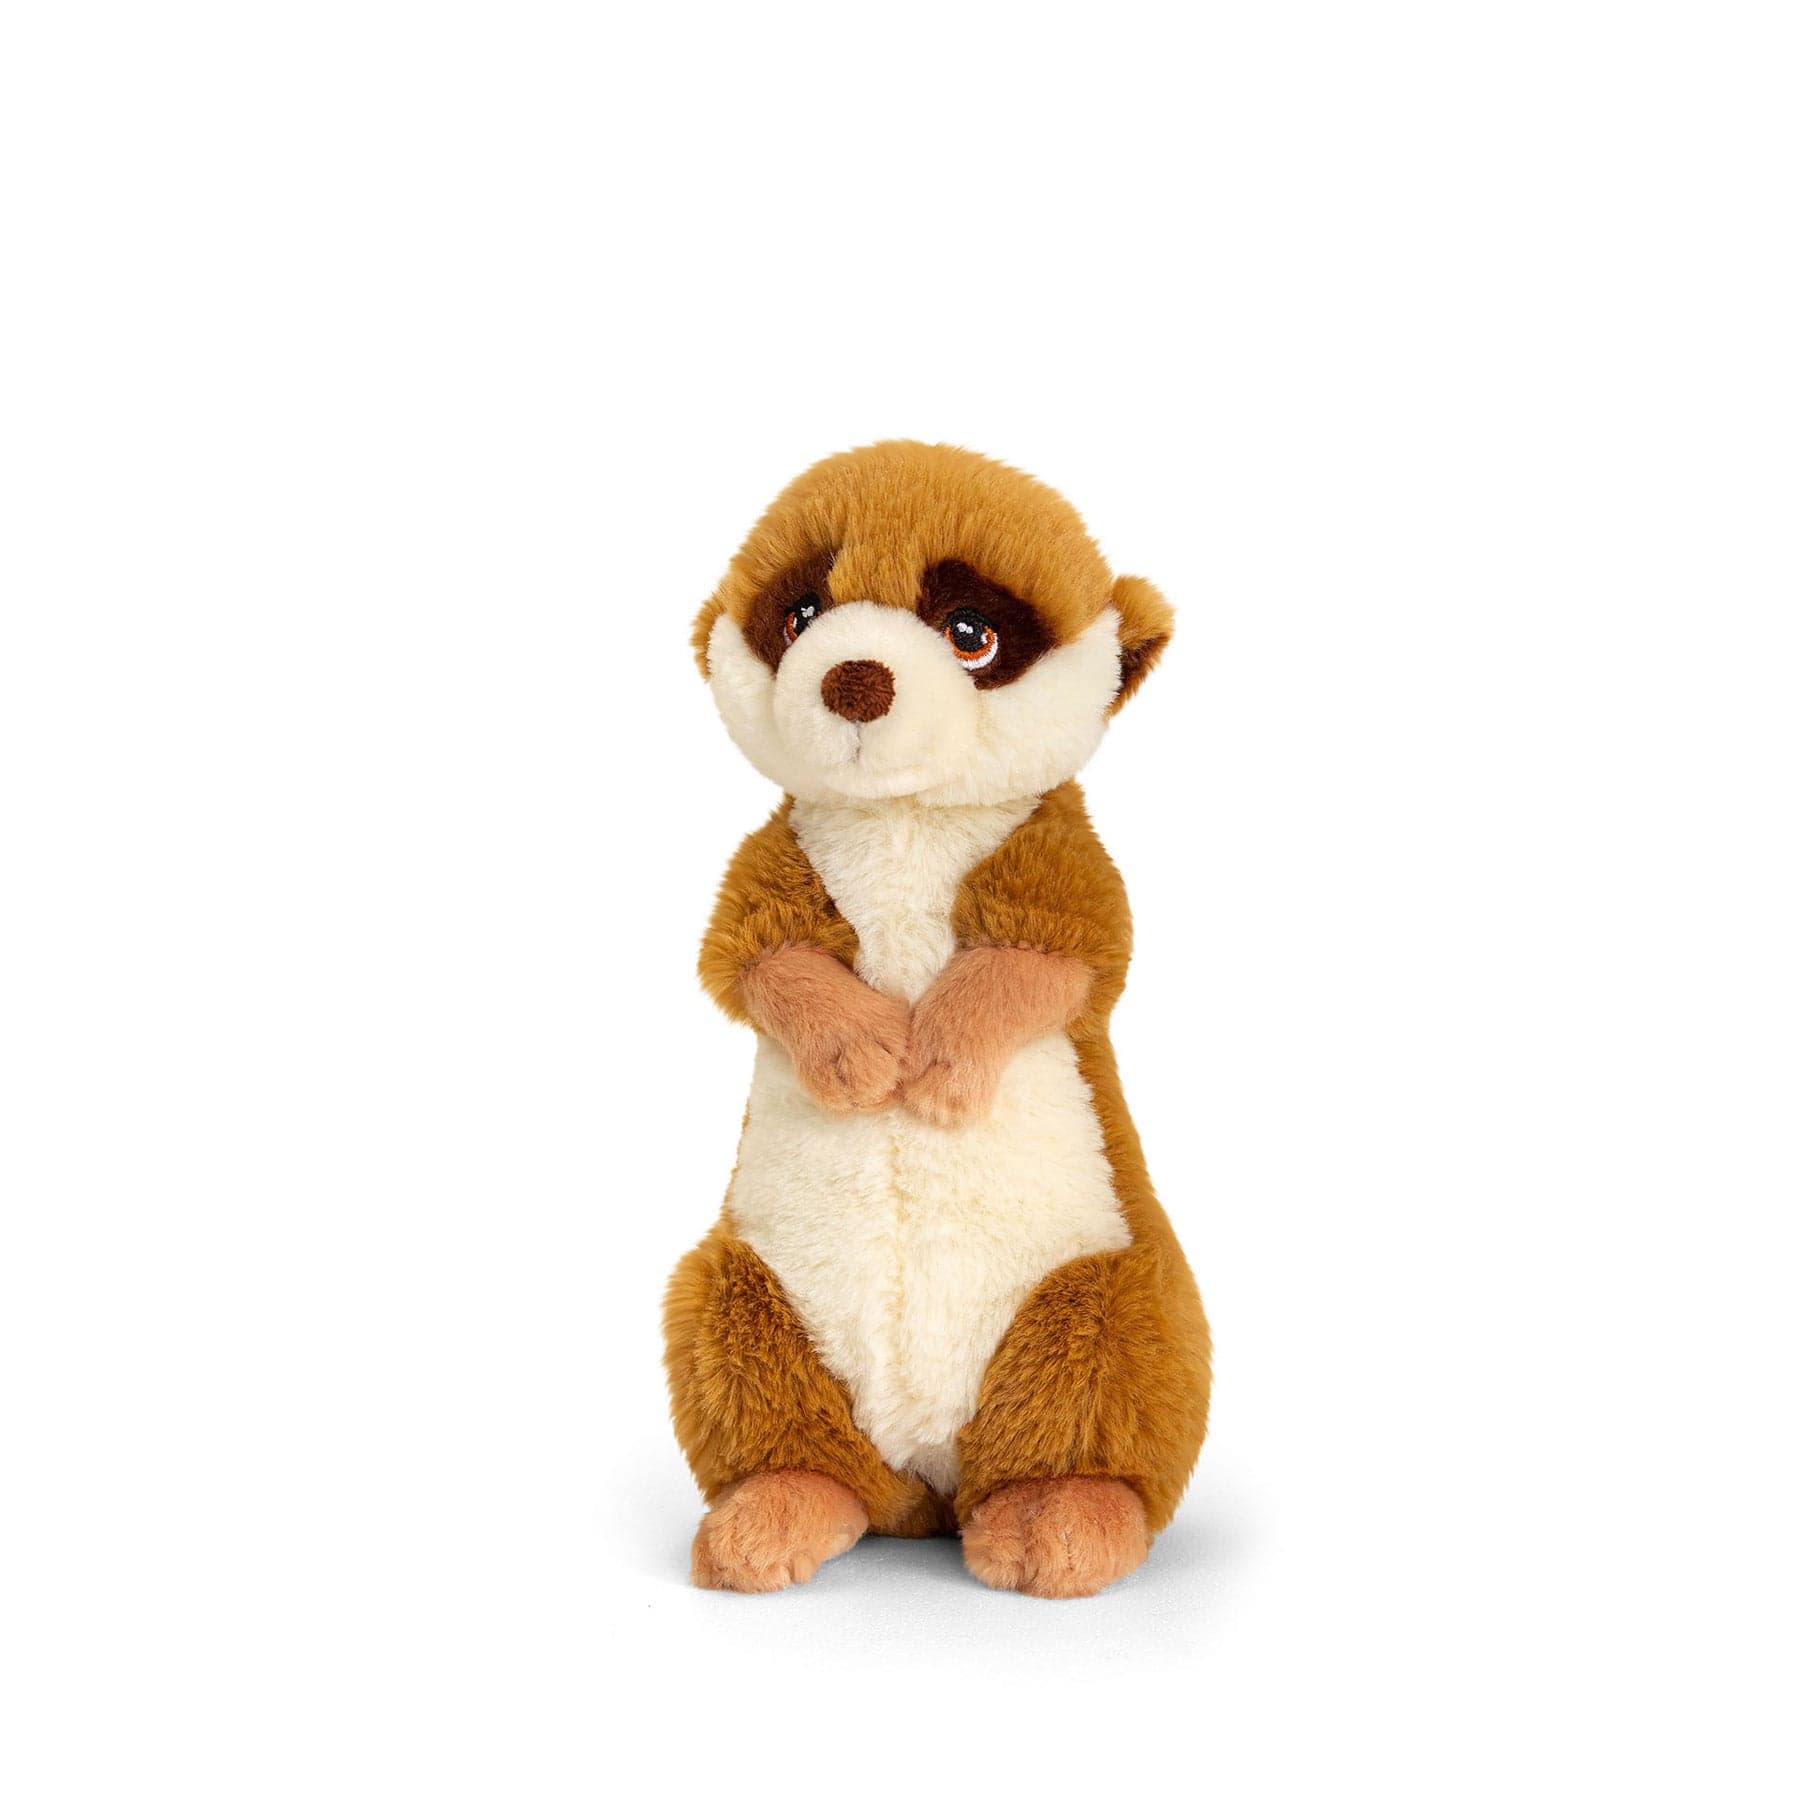 Plush toy meerkat standing against white background, stuffed animal, children's toy, cute meerkat soft toy, isolated plushie, gift idea for kids.